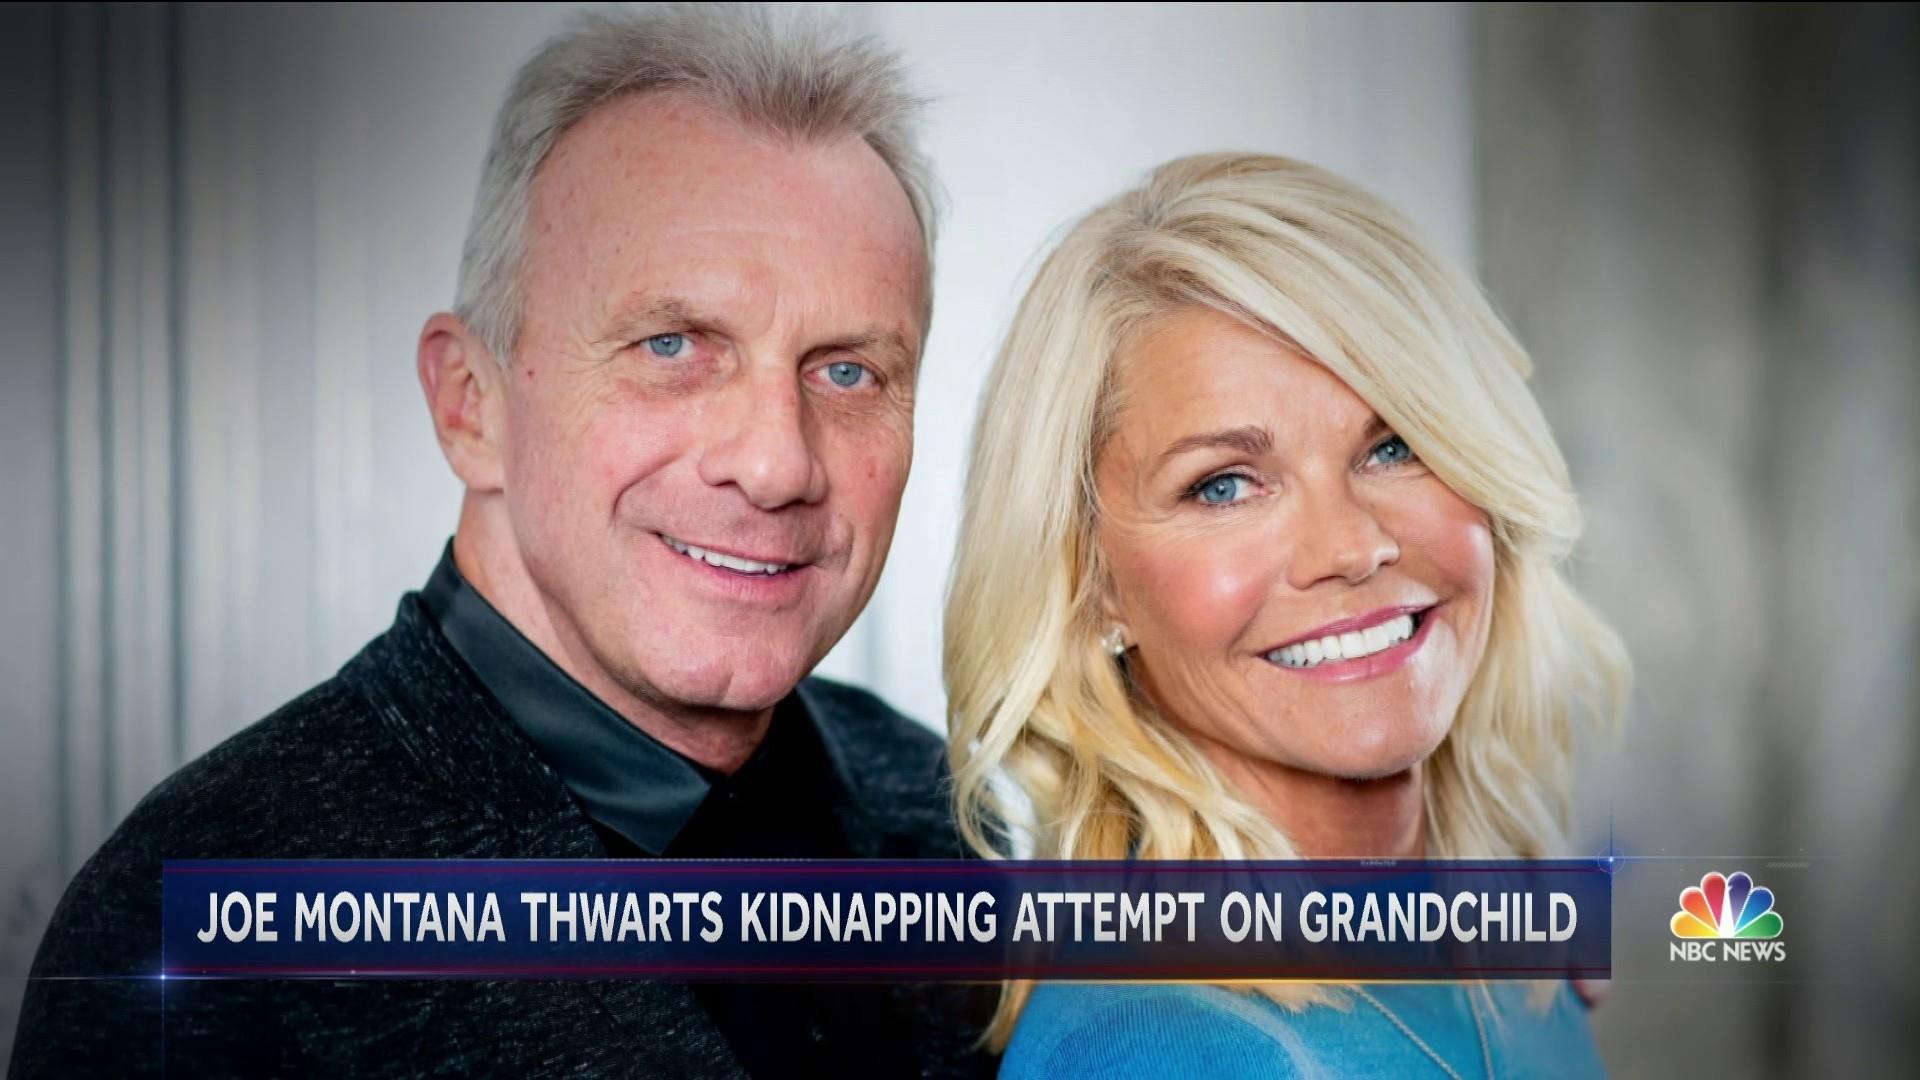 Joe Montana and wife rescue grandchild from attempted kidnapping